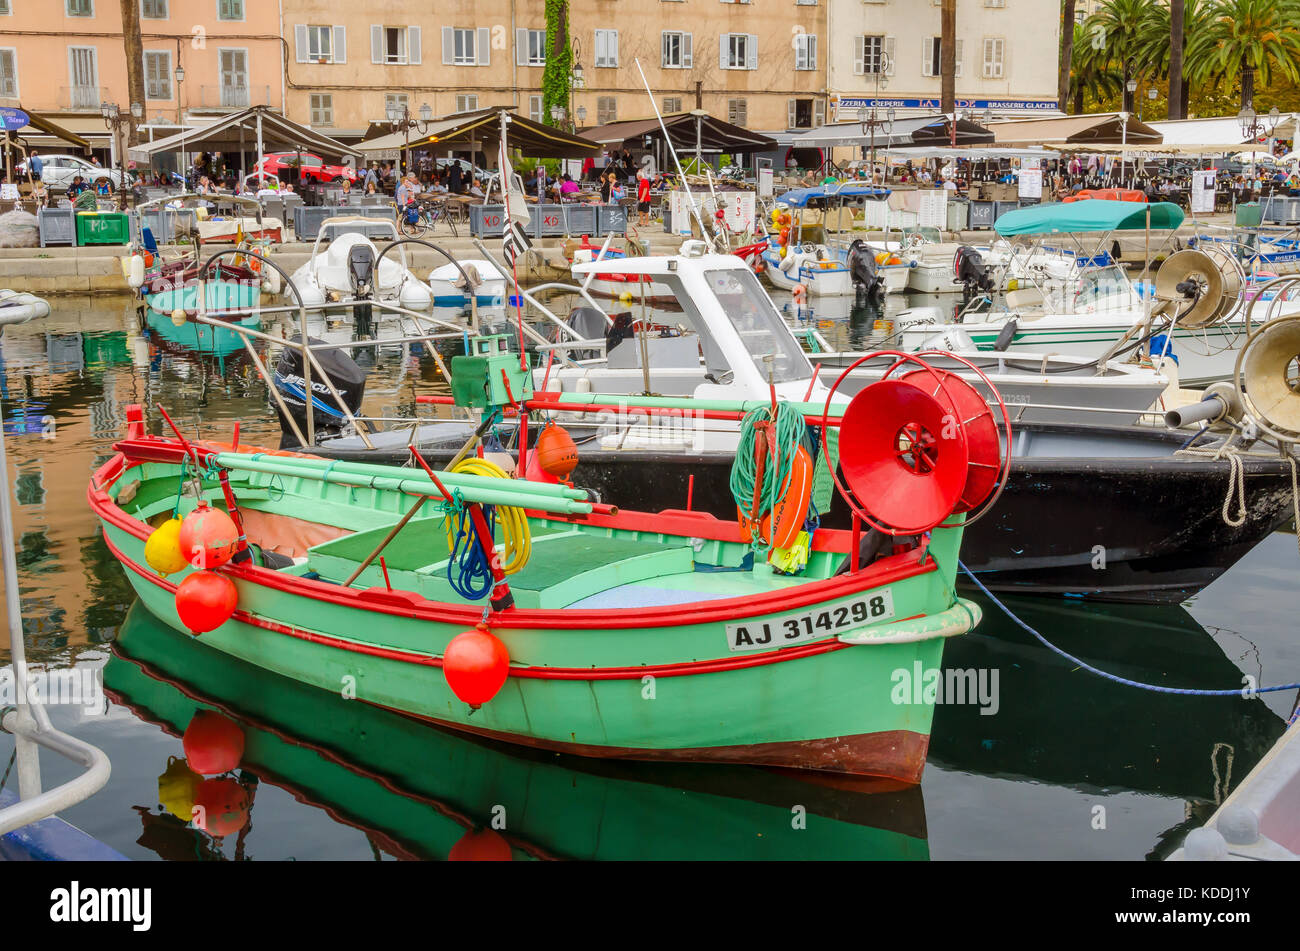 Green and red fishing boat in the habor marina, Ajaccio, Corsica, France. Stock Photo